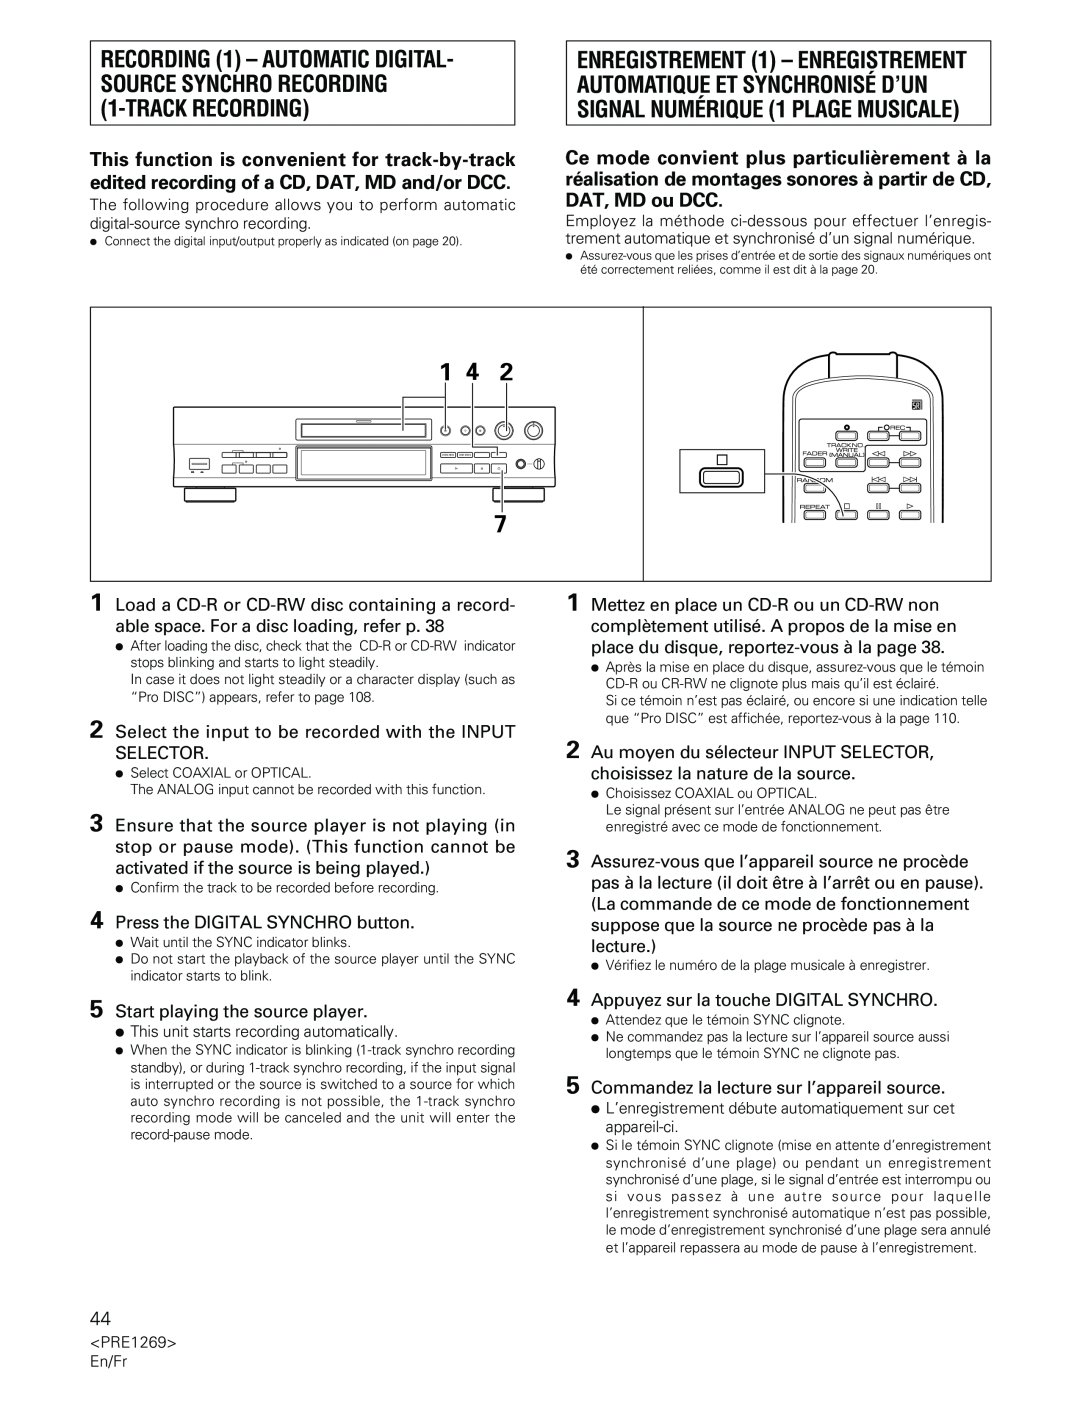 Pioneer PDR-555RW operating instructions 1 4 7, Press the DIGITAL SYNCHRO button 